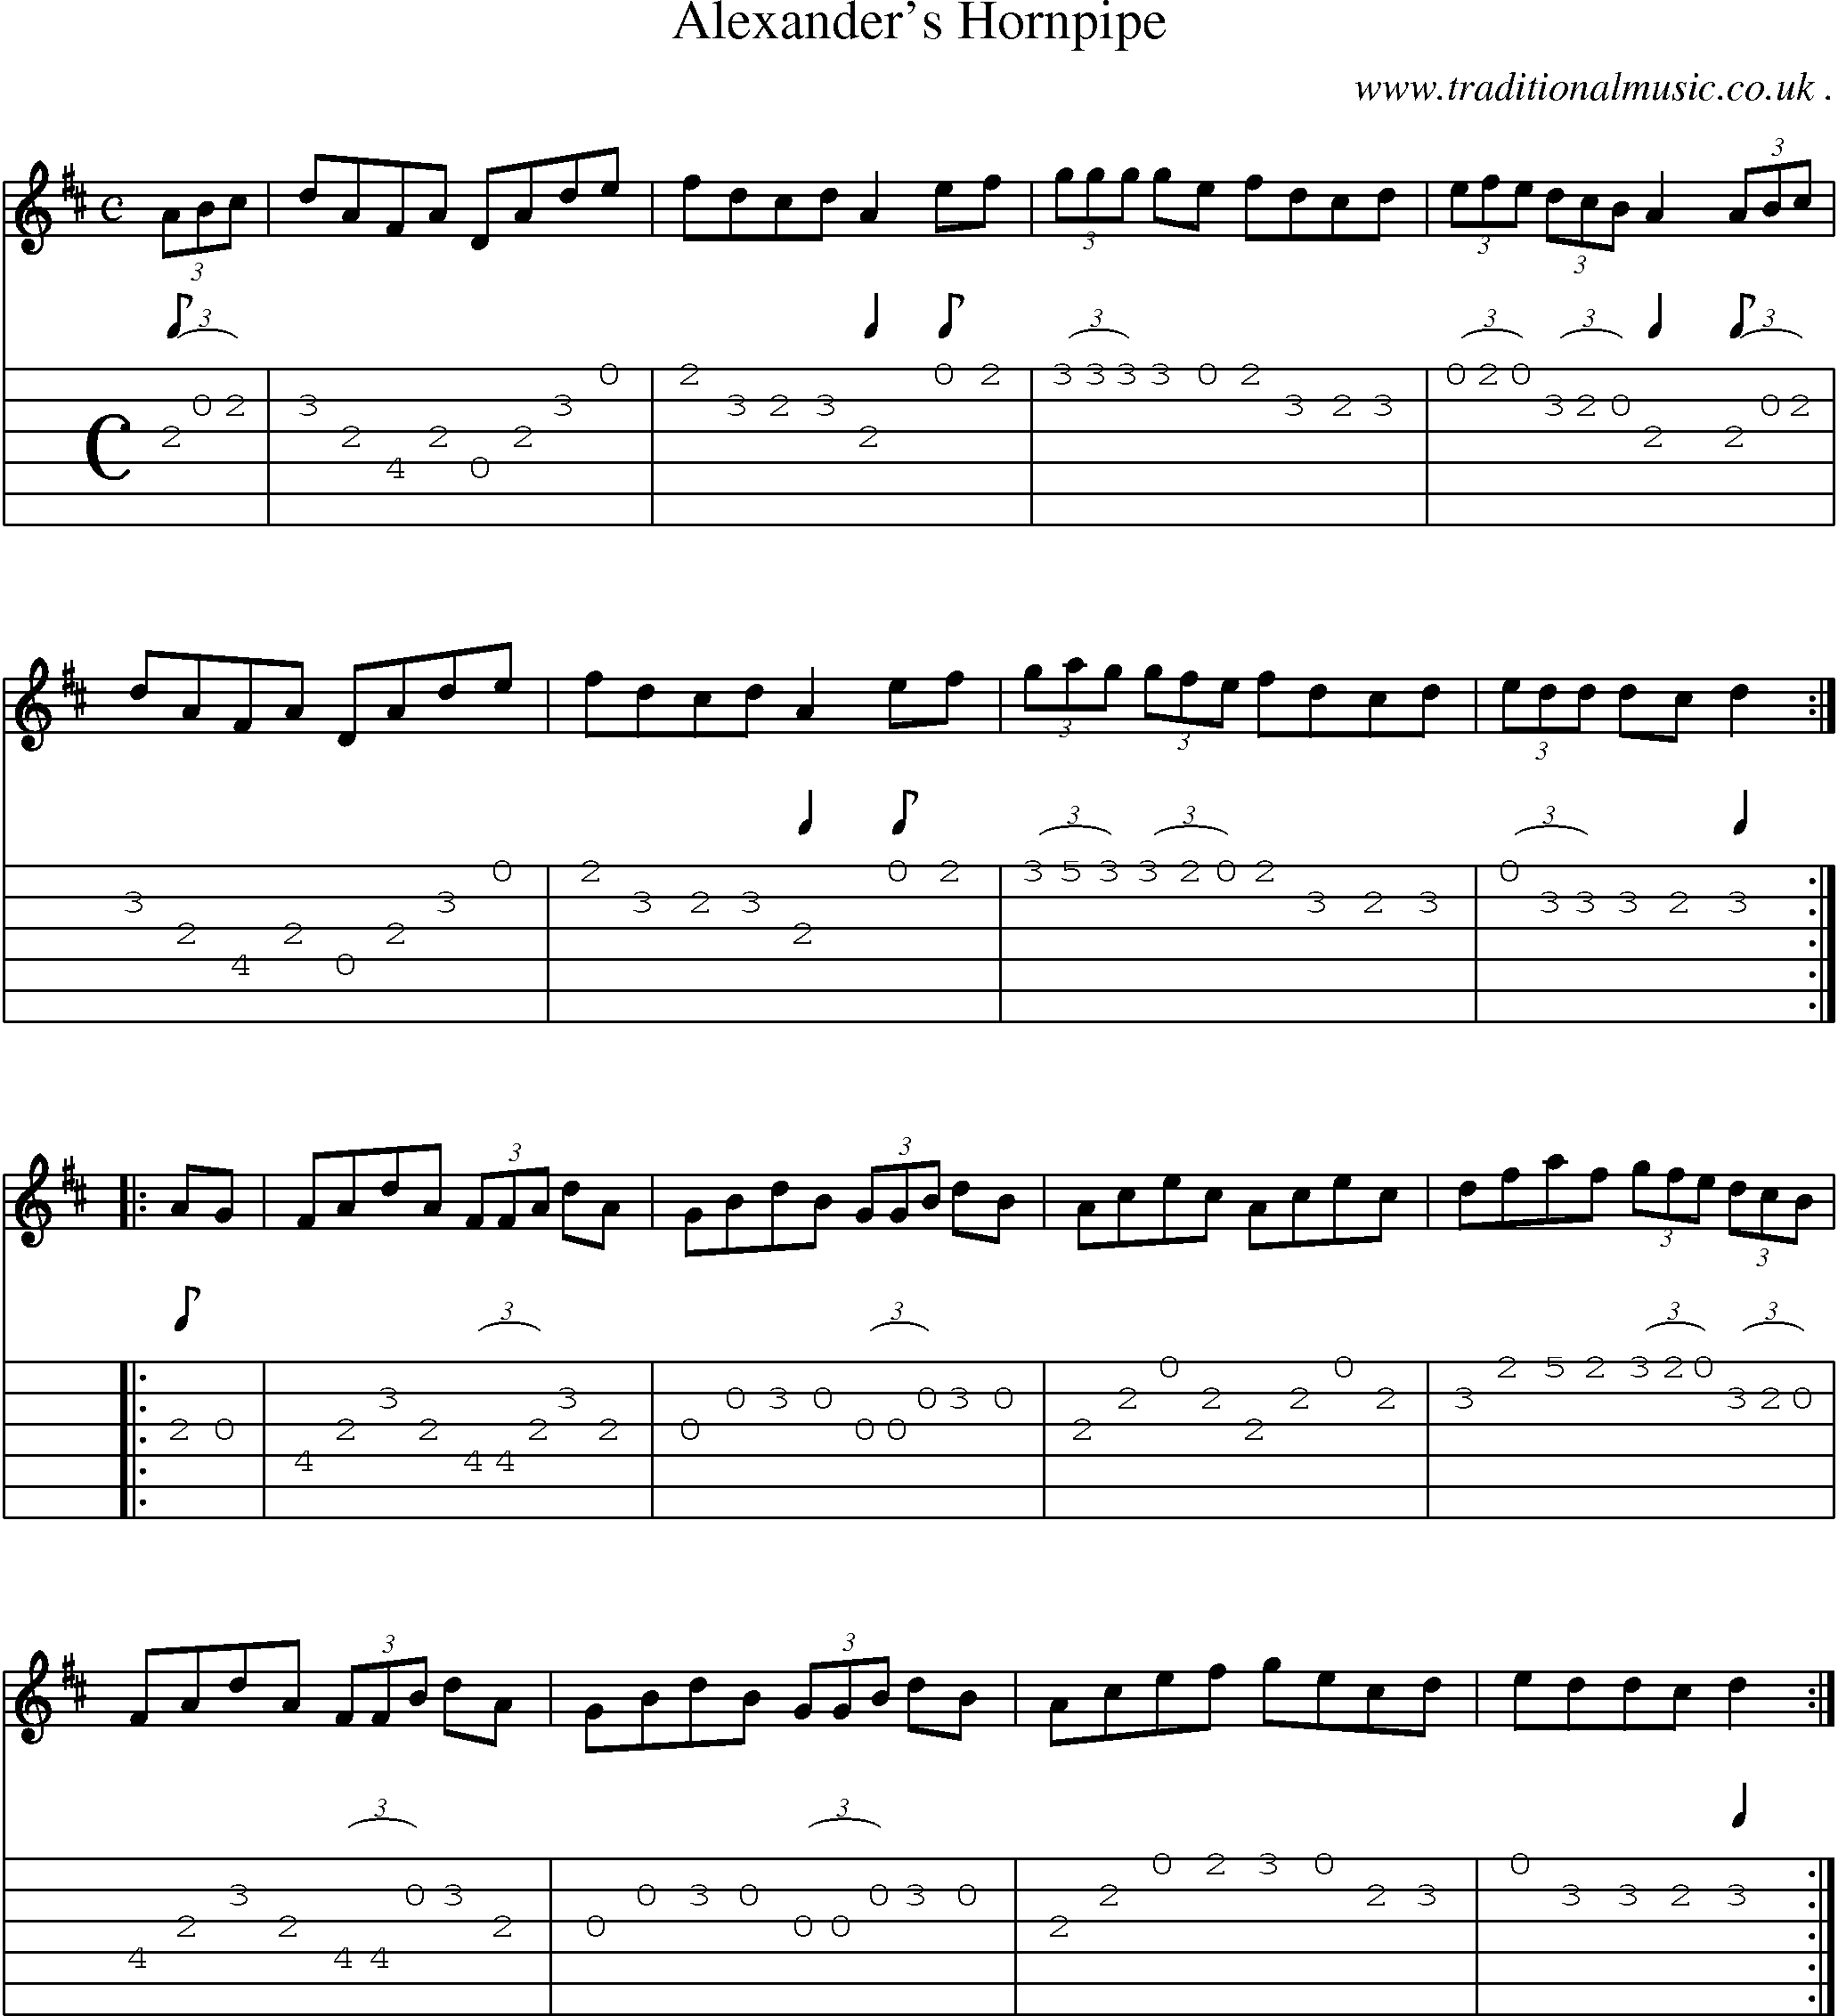 Sheet-music  score, Chords and Guitar Tabs for Alexanders Hornpipe